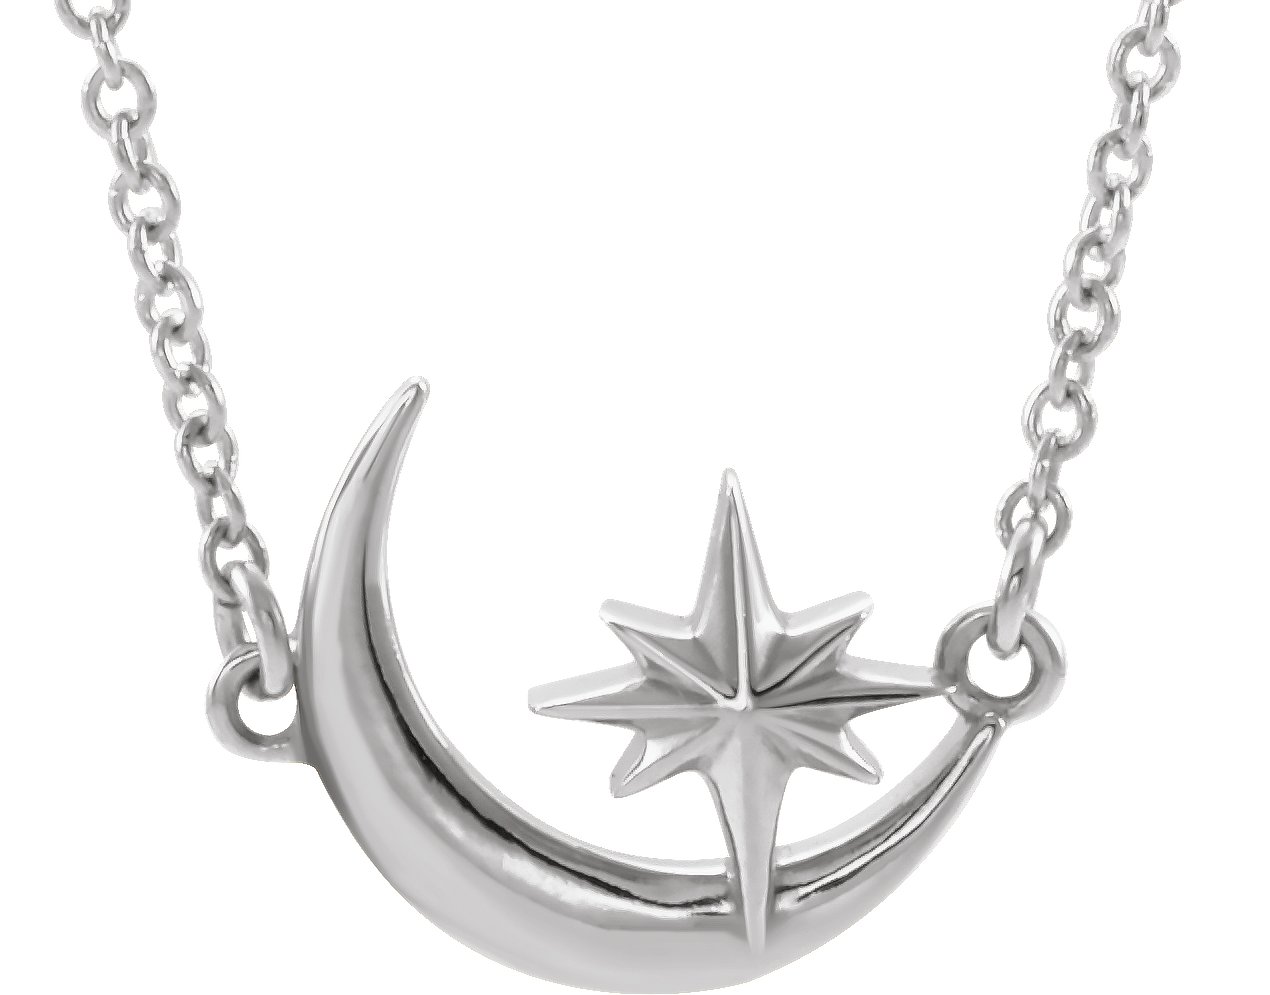 Sterling Silver Crescent Moon and Star 16 18 inch Necklace Ref. 14555063